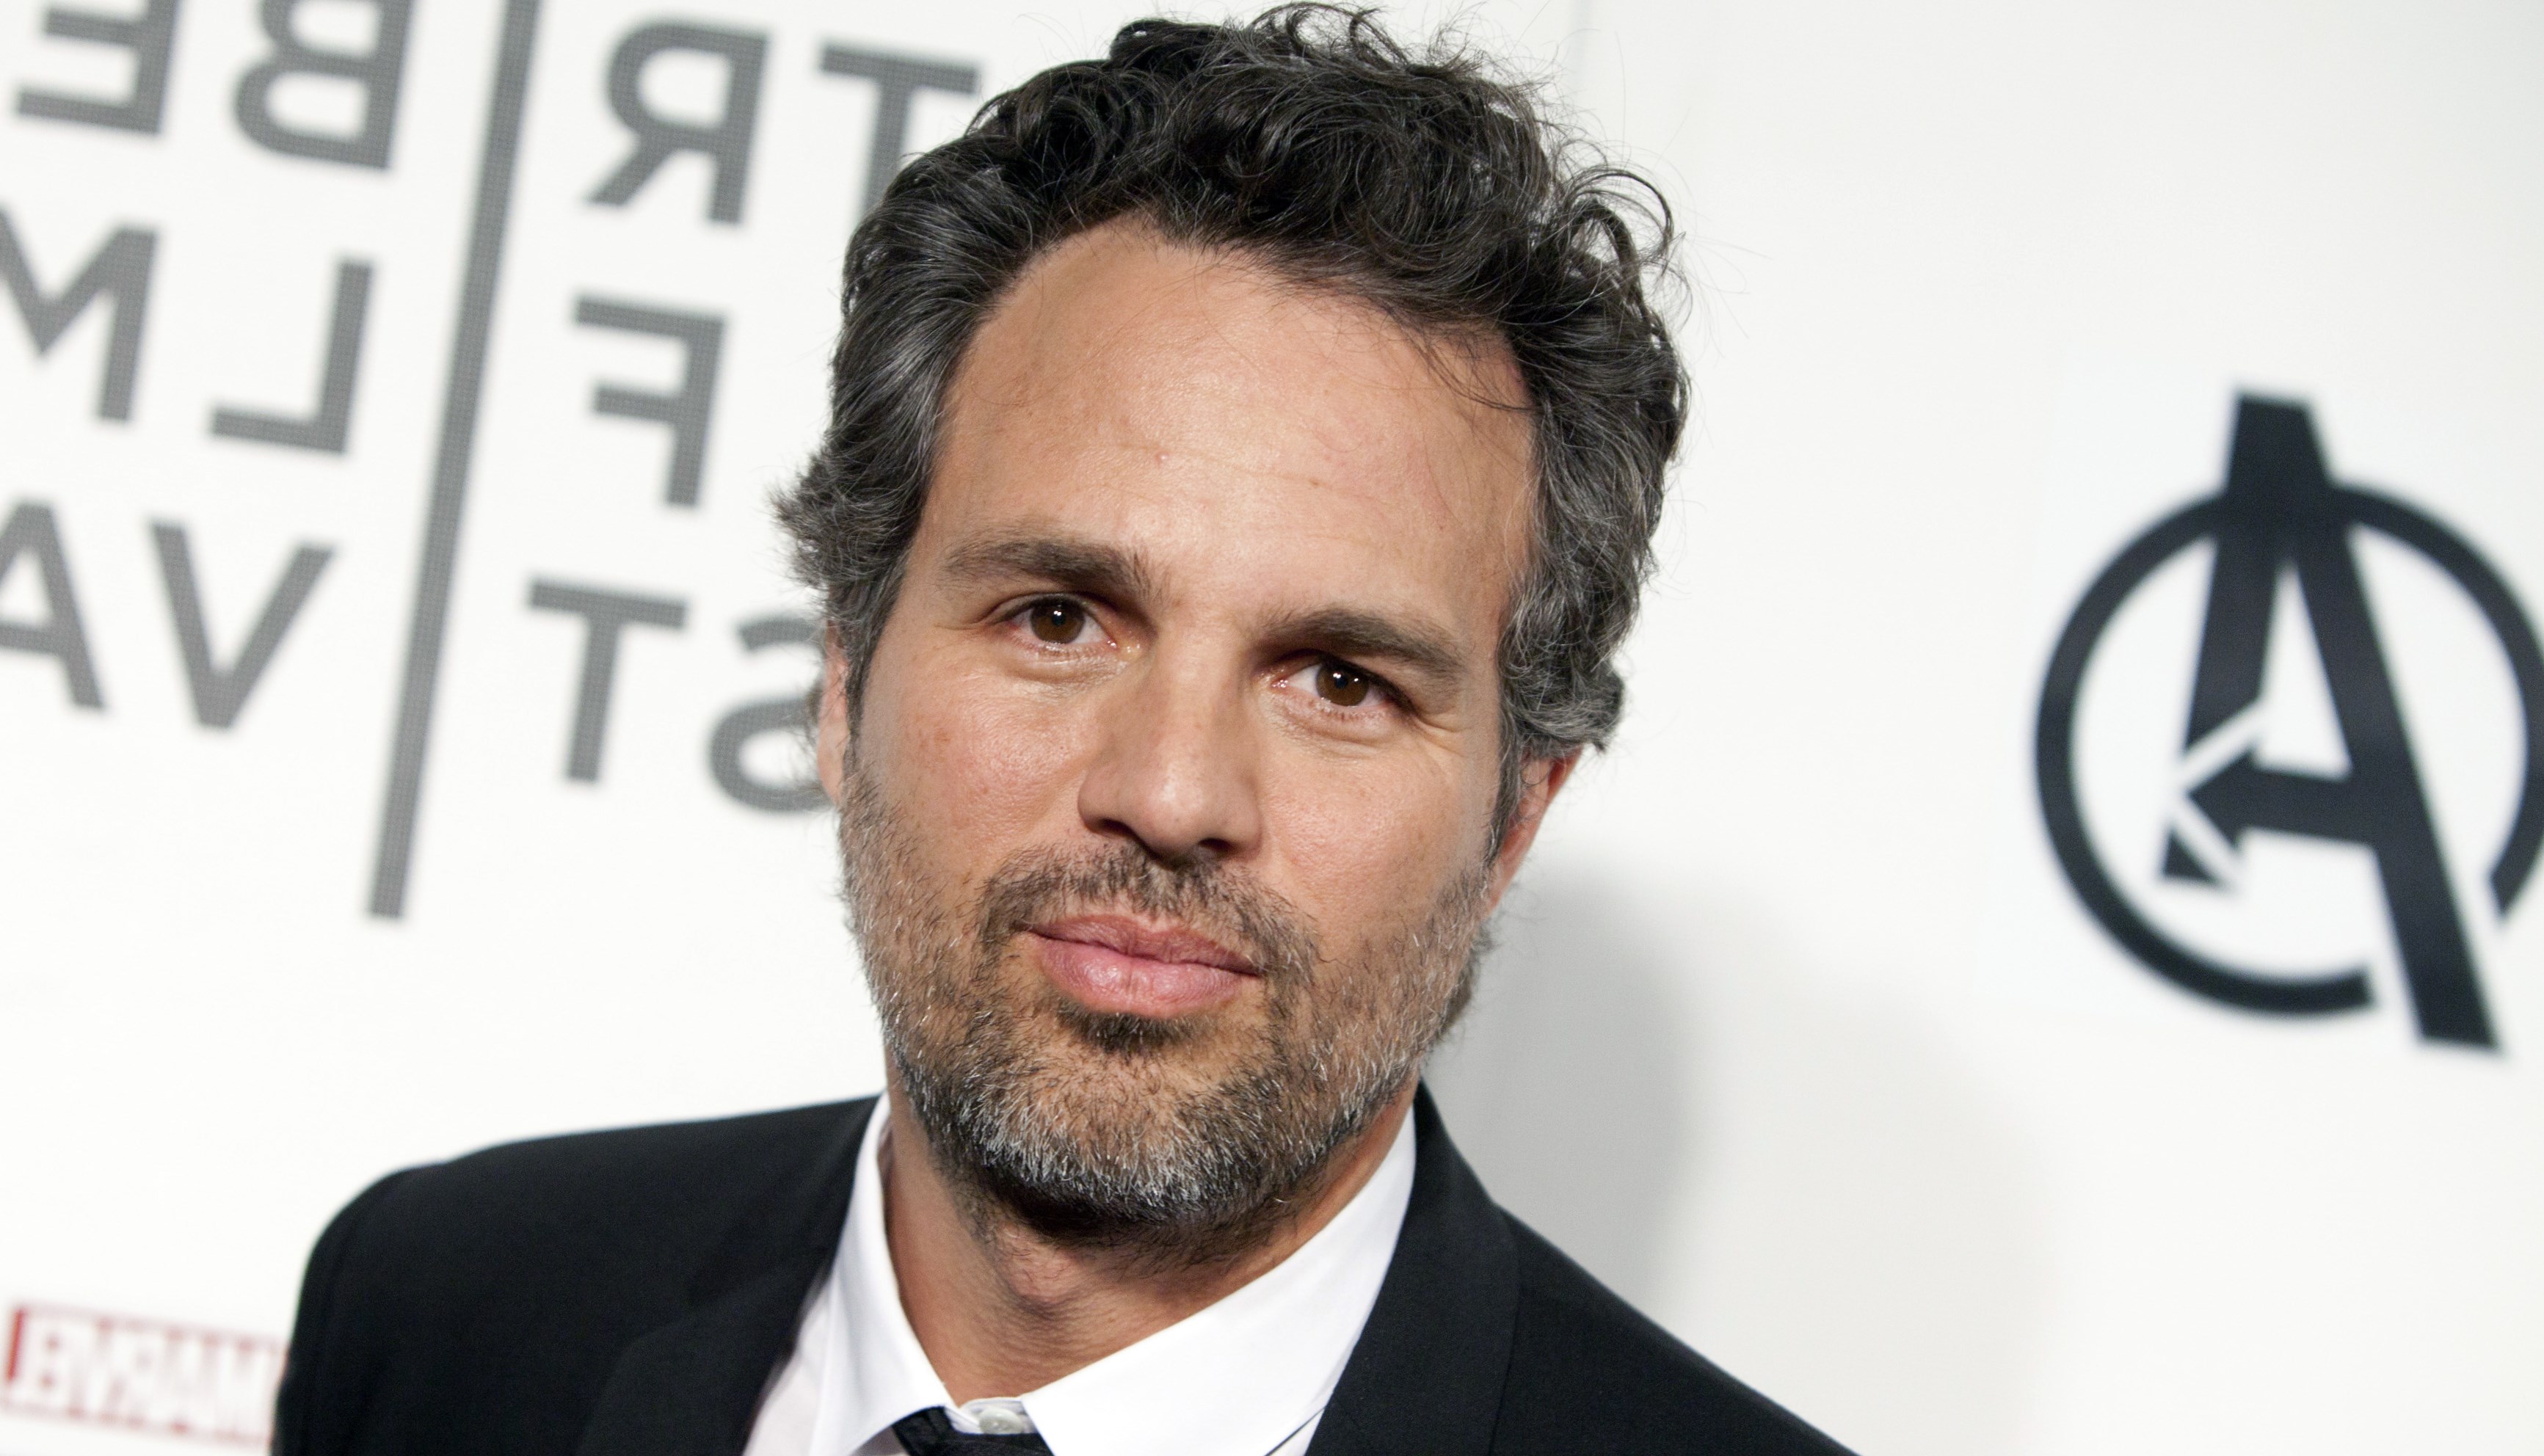 Mark Ruffalo Best Movies and TV Shows